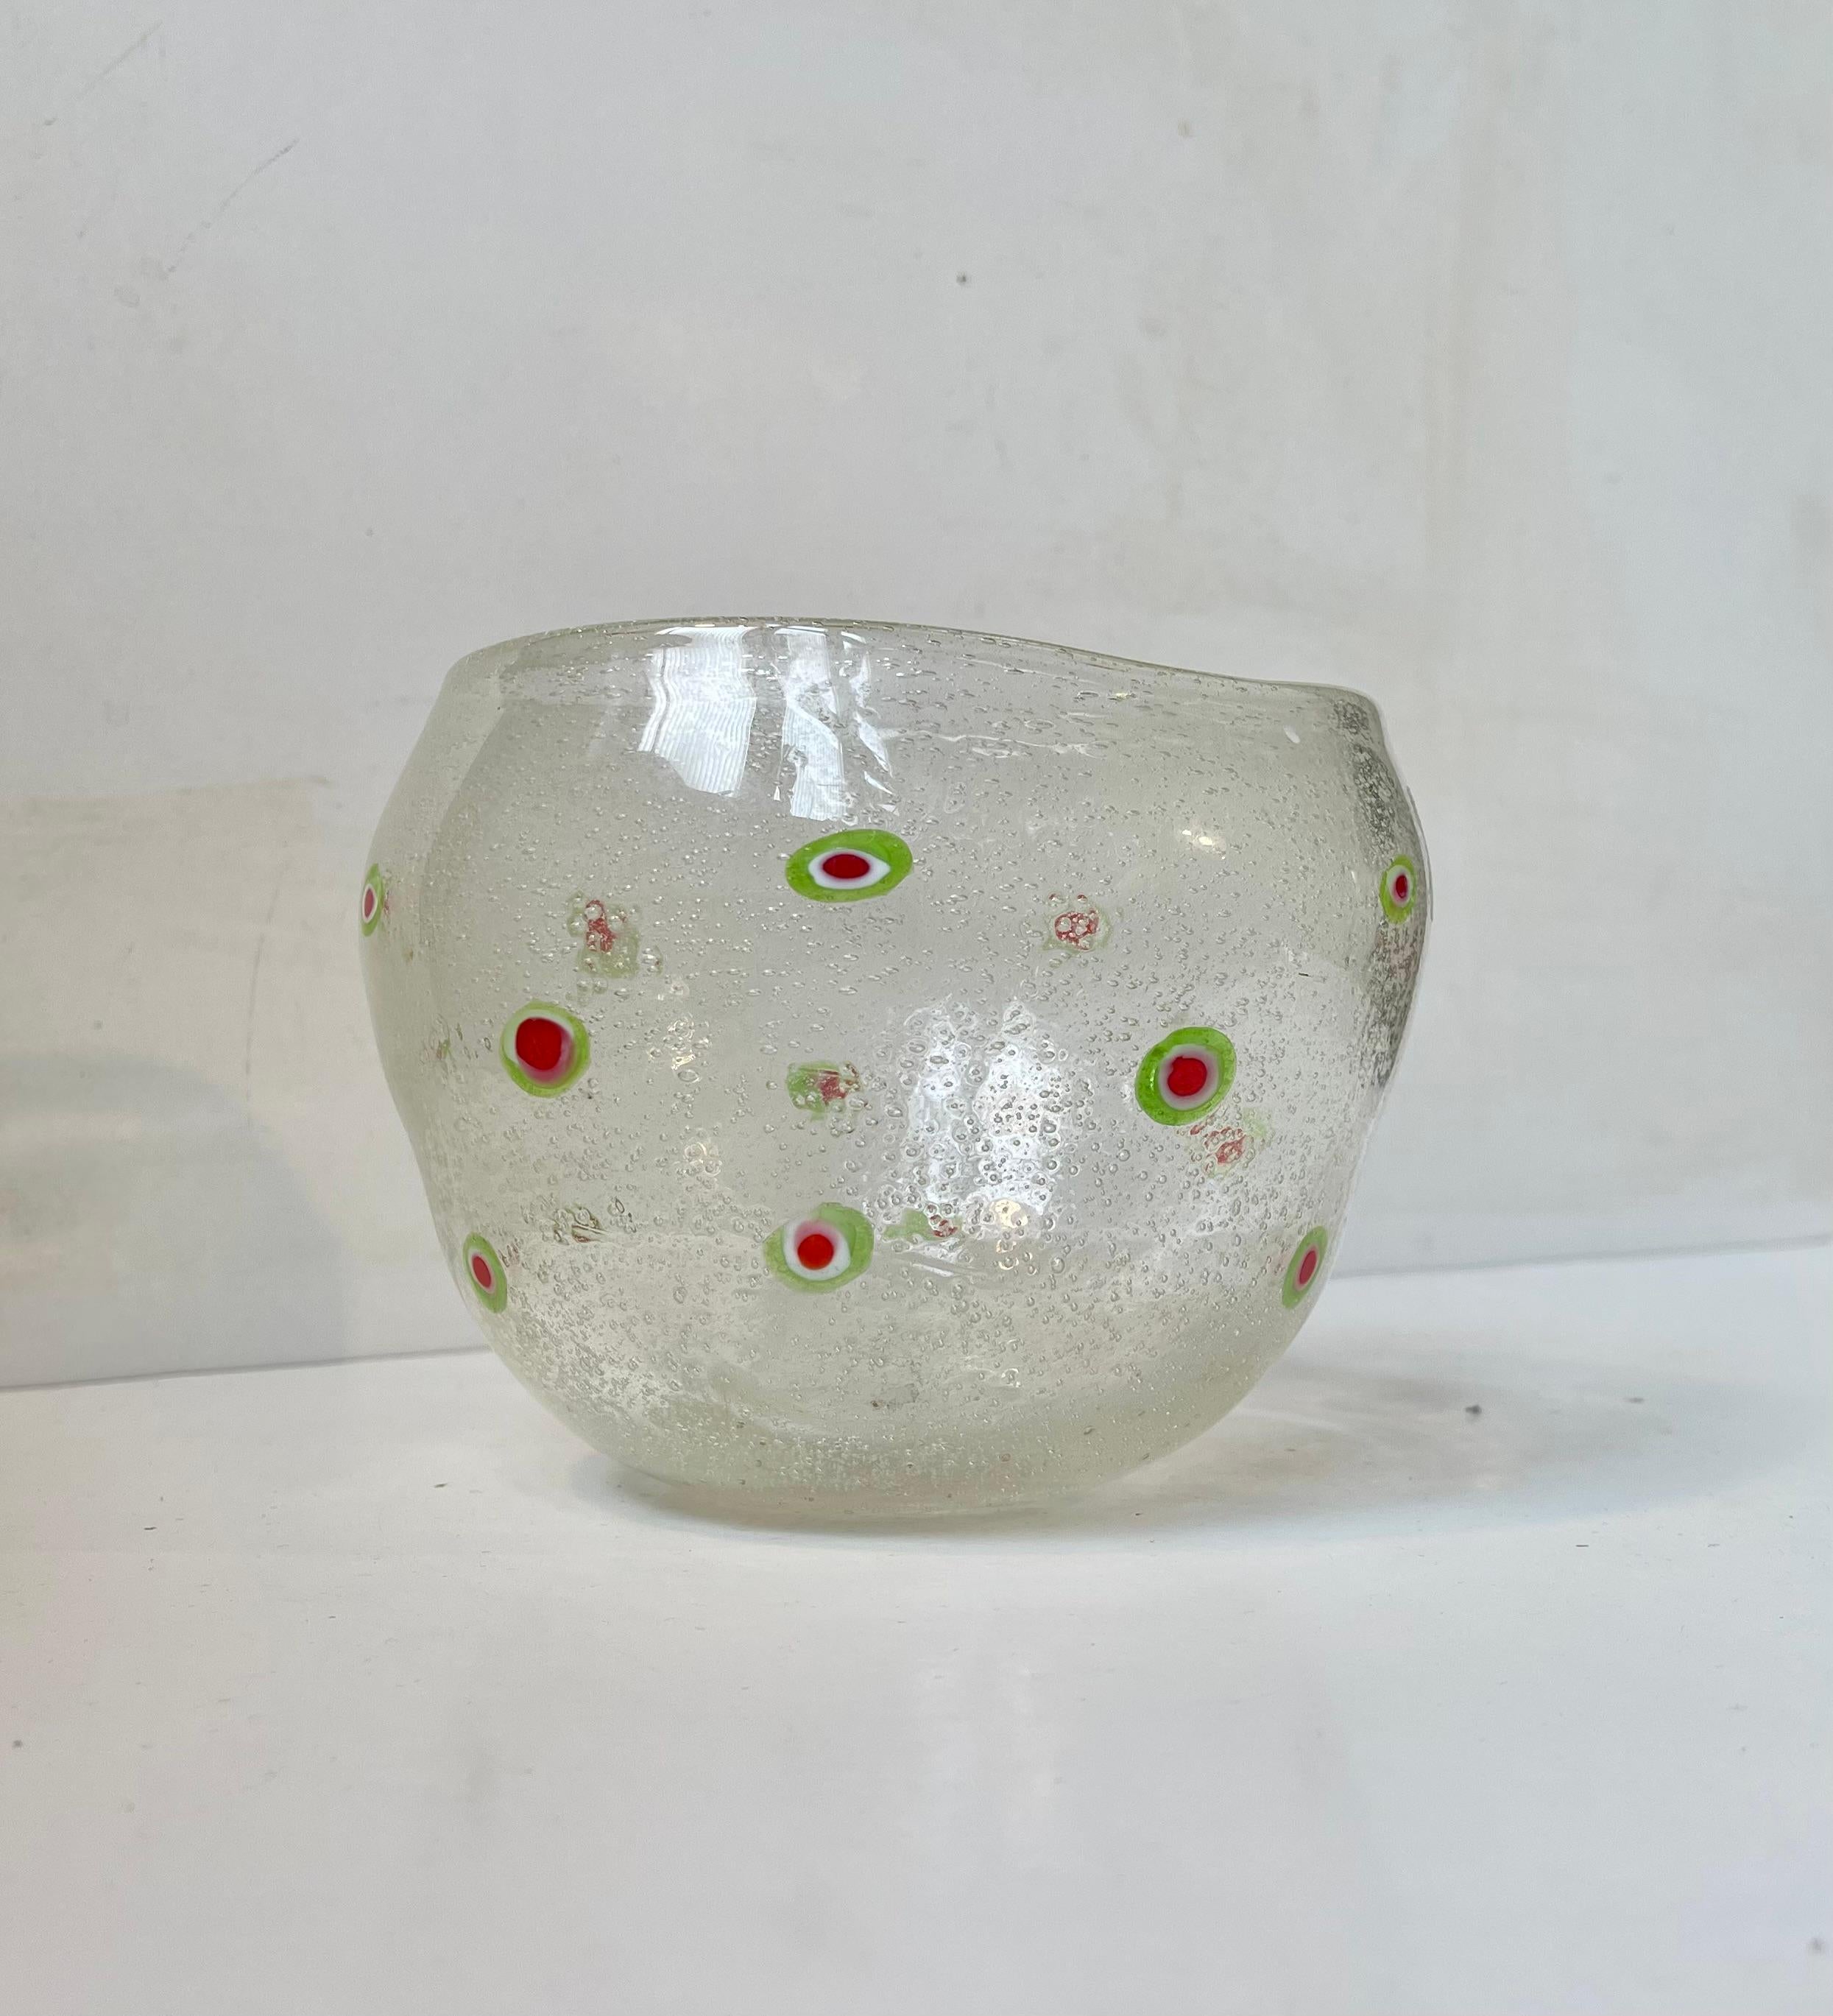 Hand blown organically shaped free-form bowl in bubble glass. Decorated with flowers in Italian tri-color: red, green and white. It was made in Murano Italy circa 1960-70. Measurements: H: 12 cm, D: 17/14 cm.